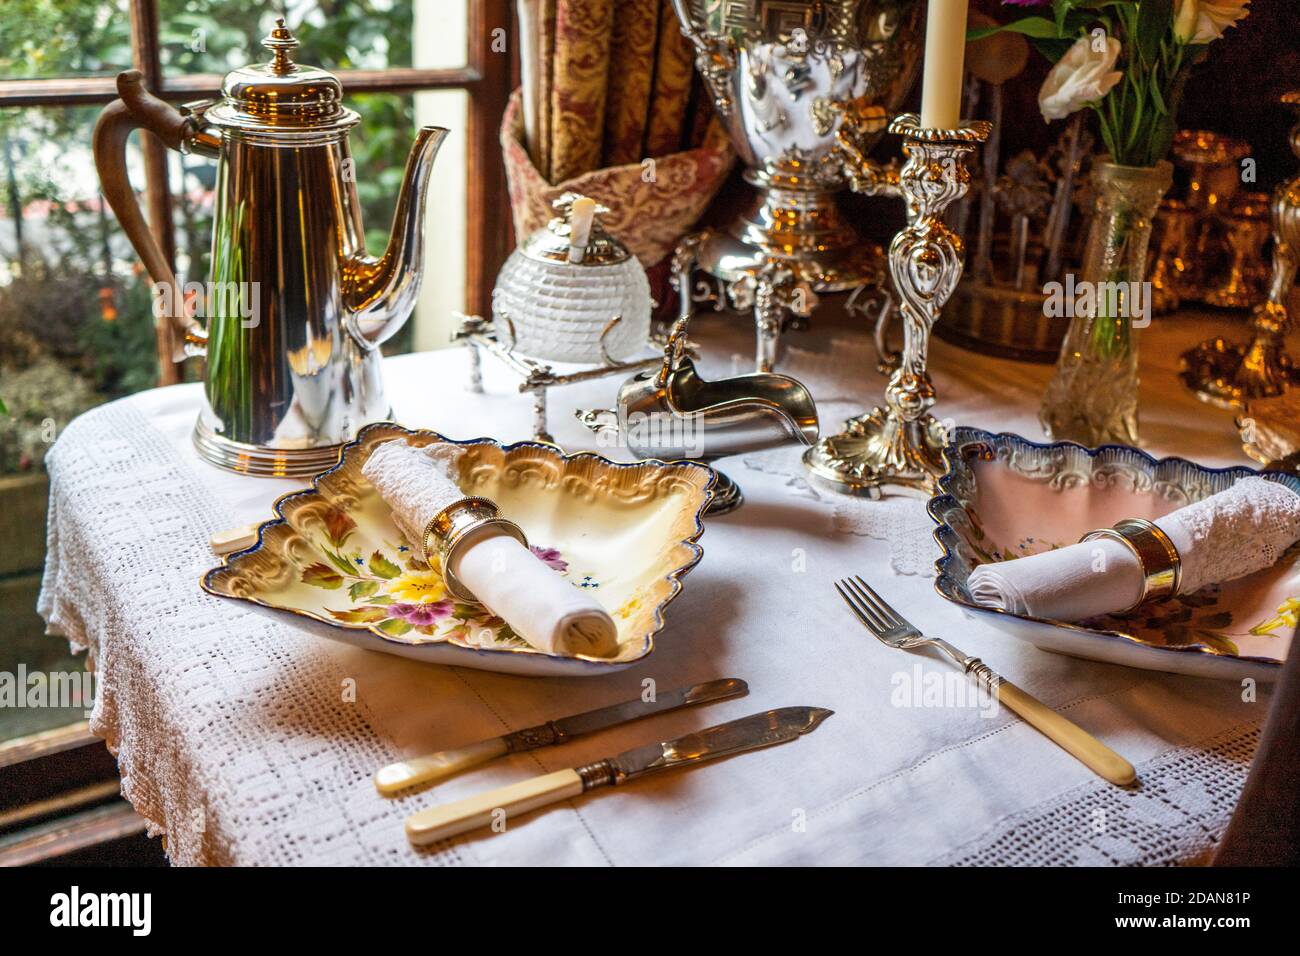 Set table with antique dishes Stock Photo